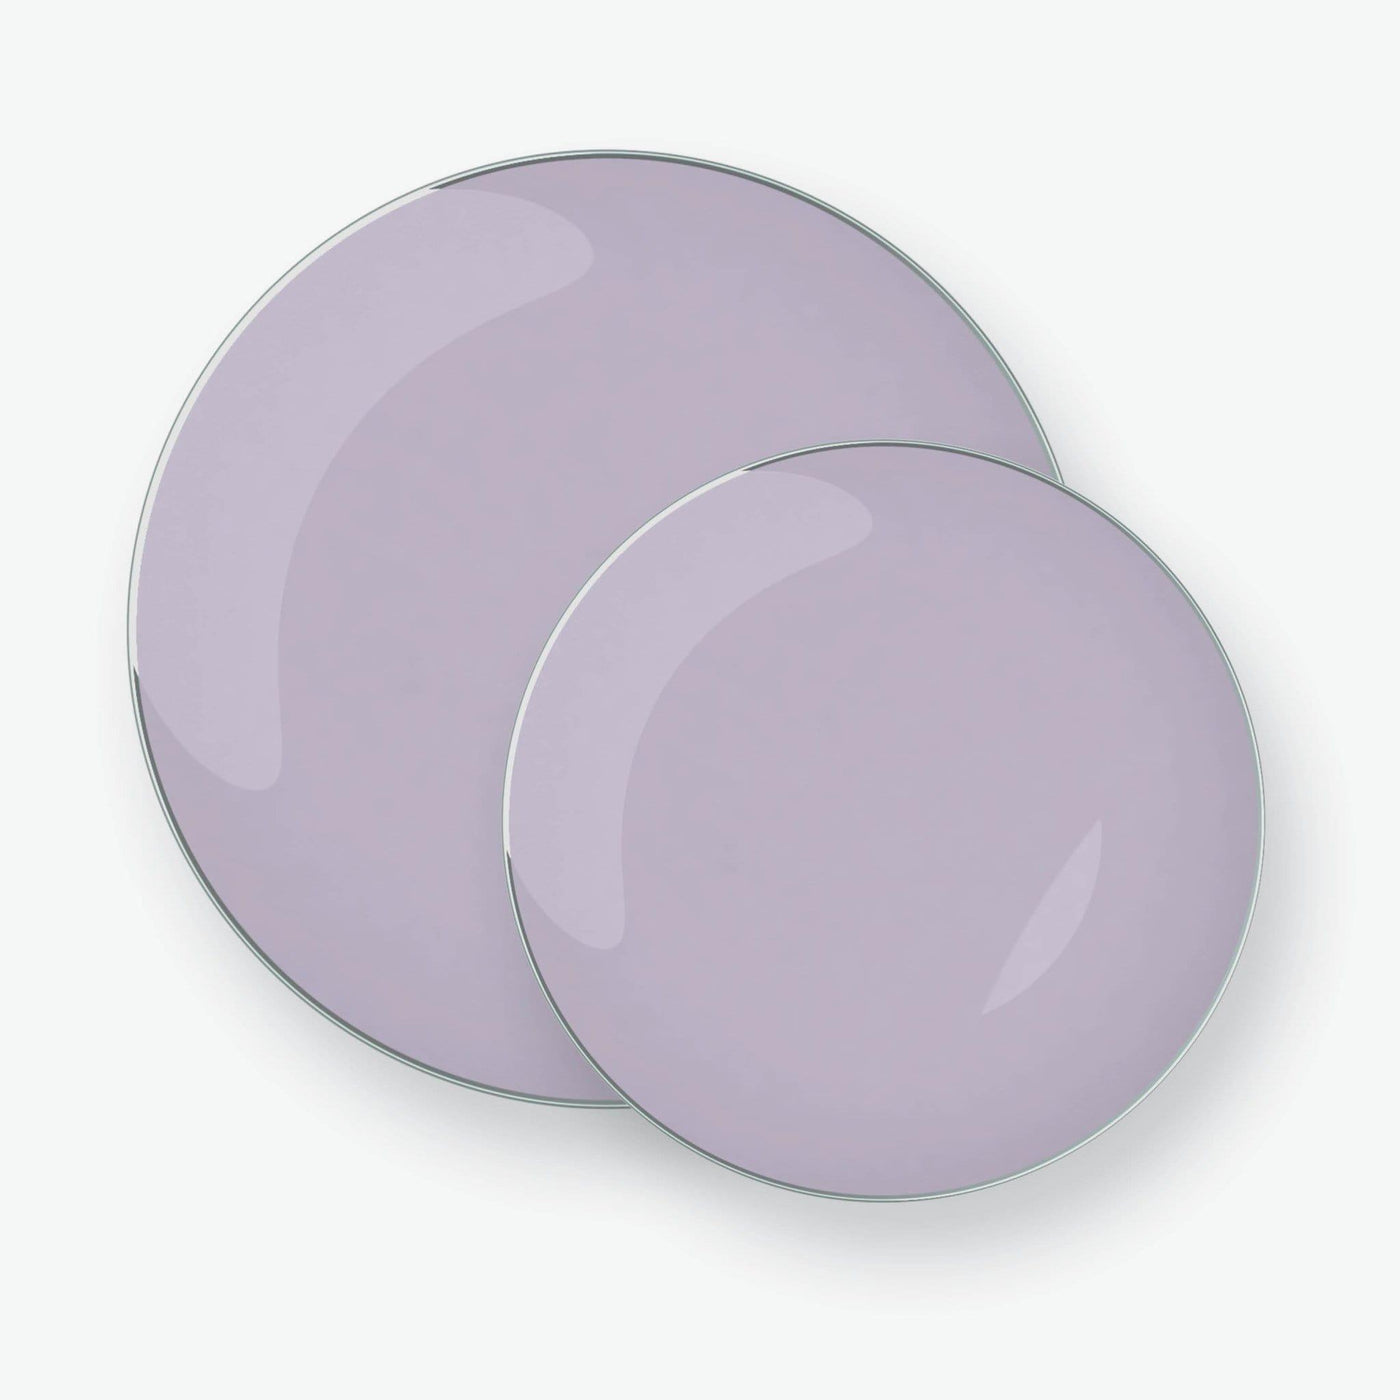 Lavender • Silver Round Plastic Plates, 10.25" Dinner Plate | 10 Pack - Set With Style